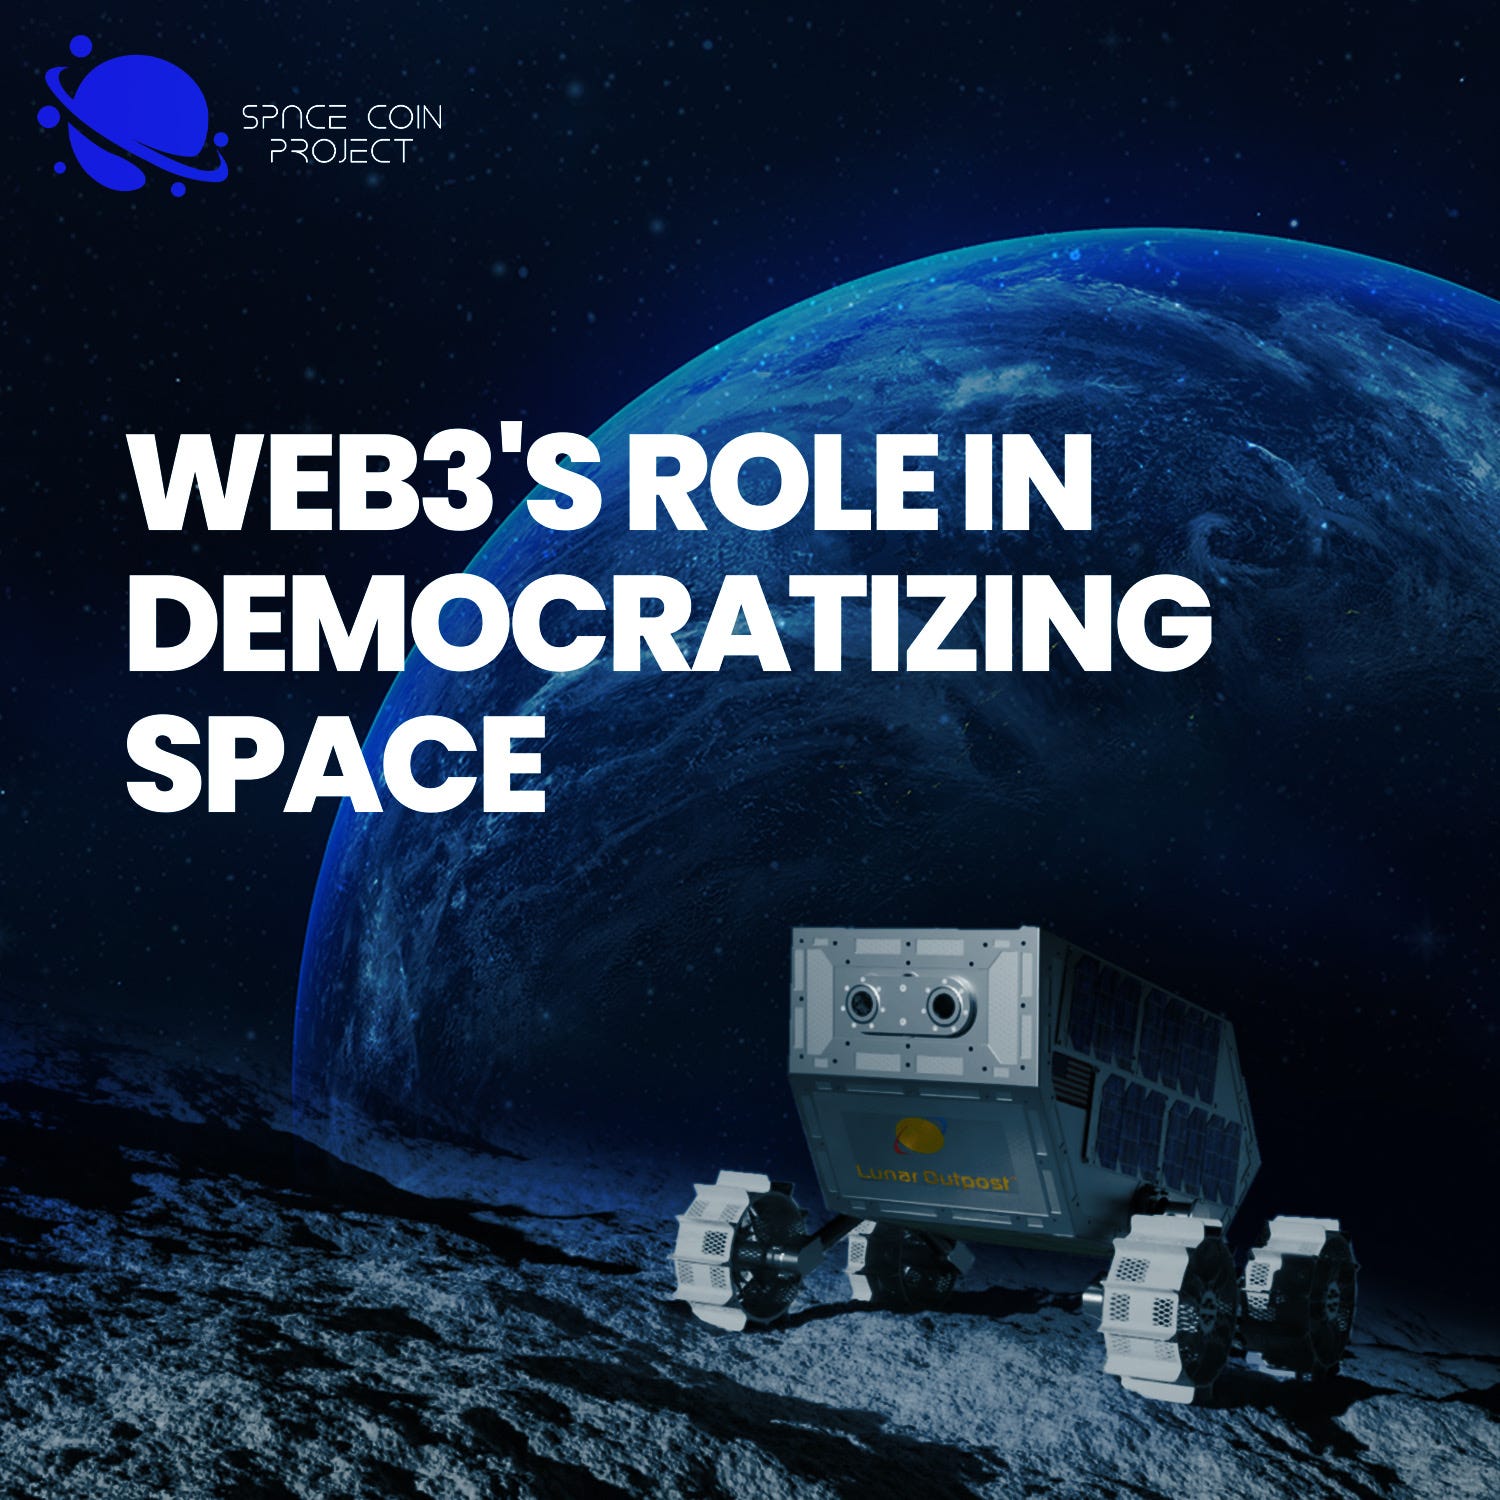 What role is web3 playing in democratizing space-